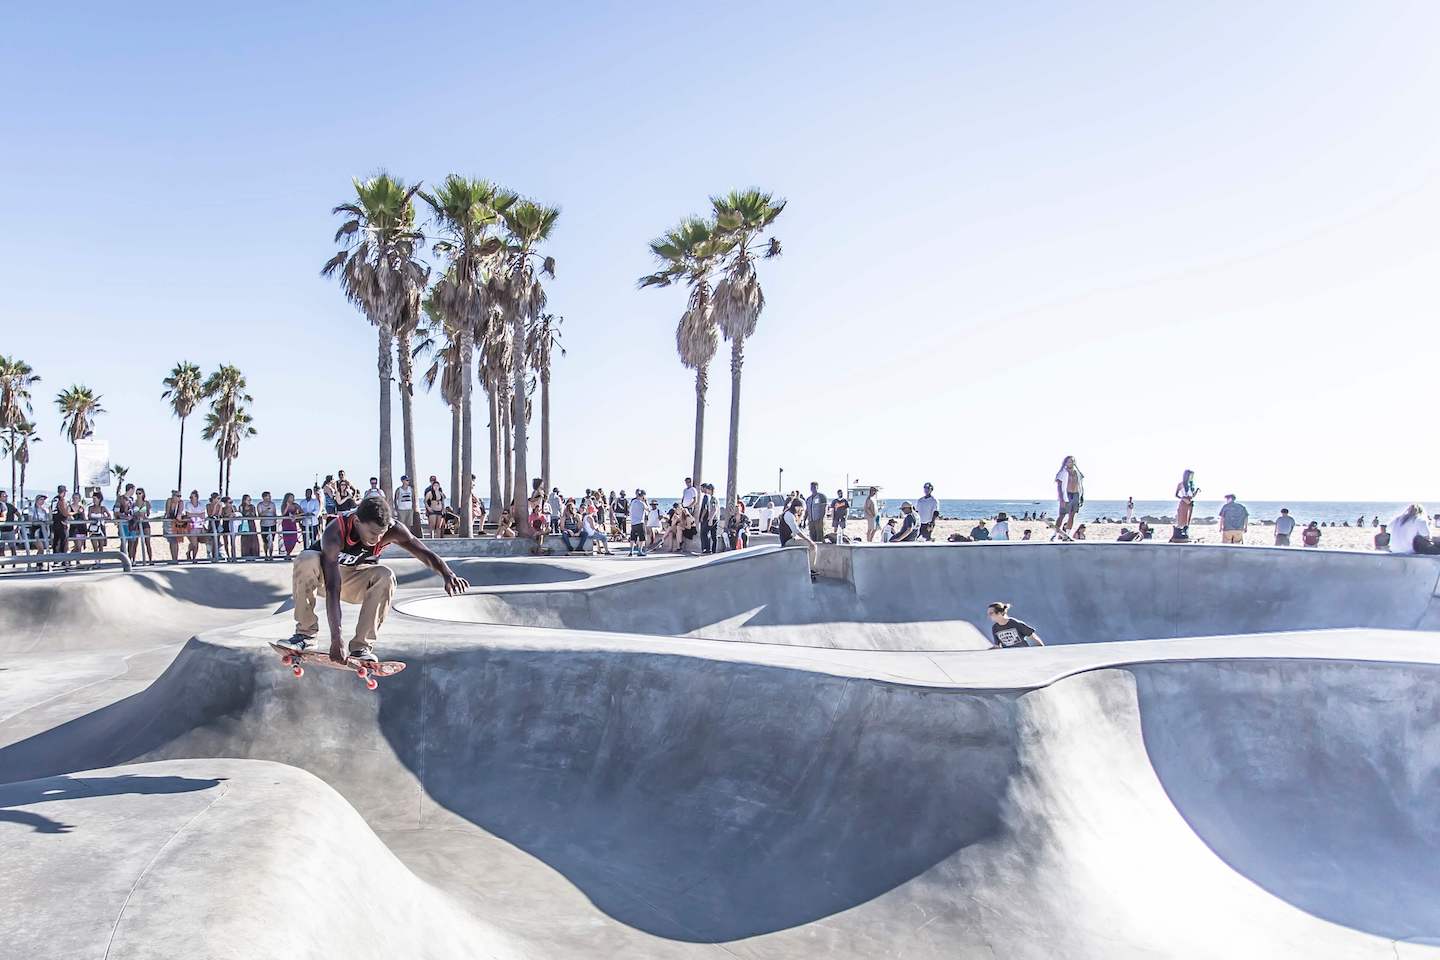 A skateboarder does a grab trick in a bowl-shaped skate park. In the background is a watching crowd, palm trees, and the ocean.